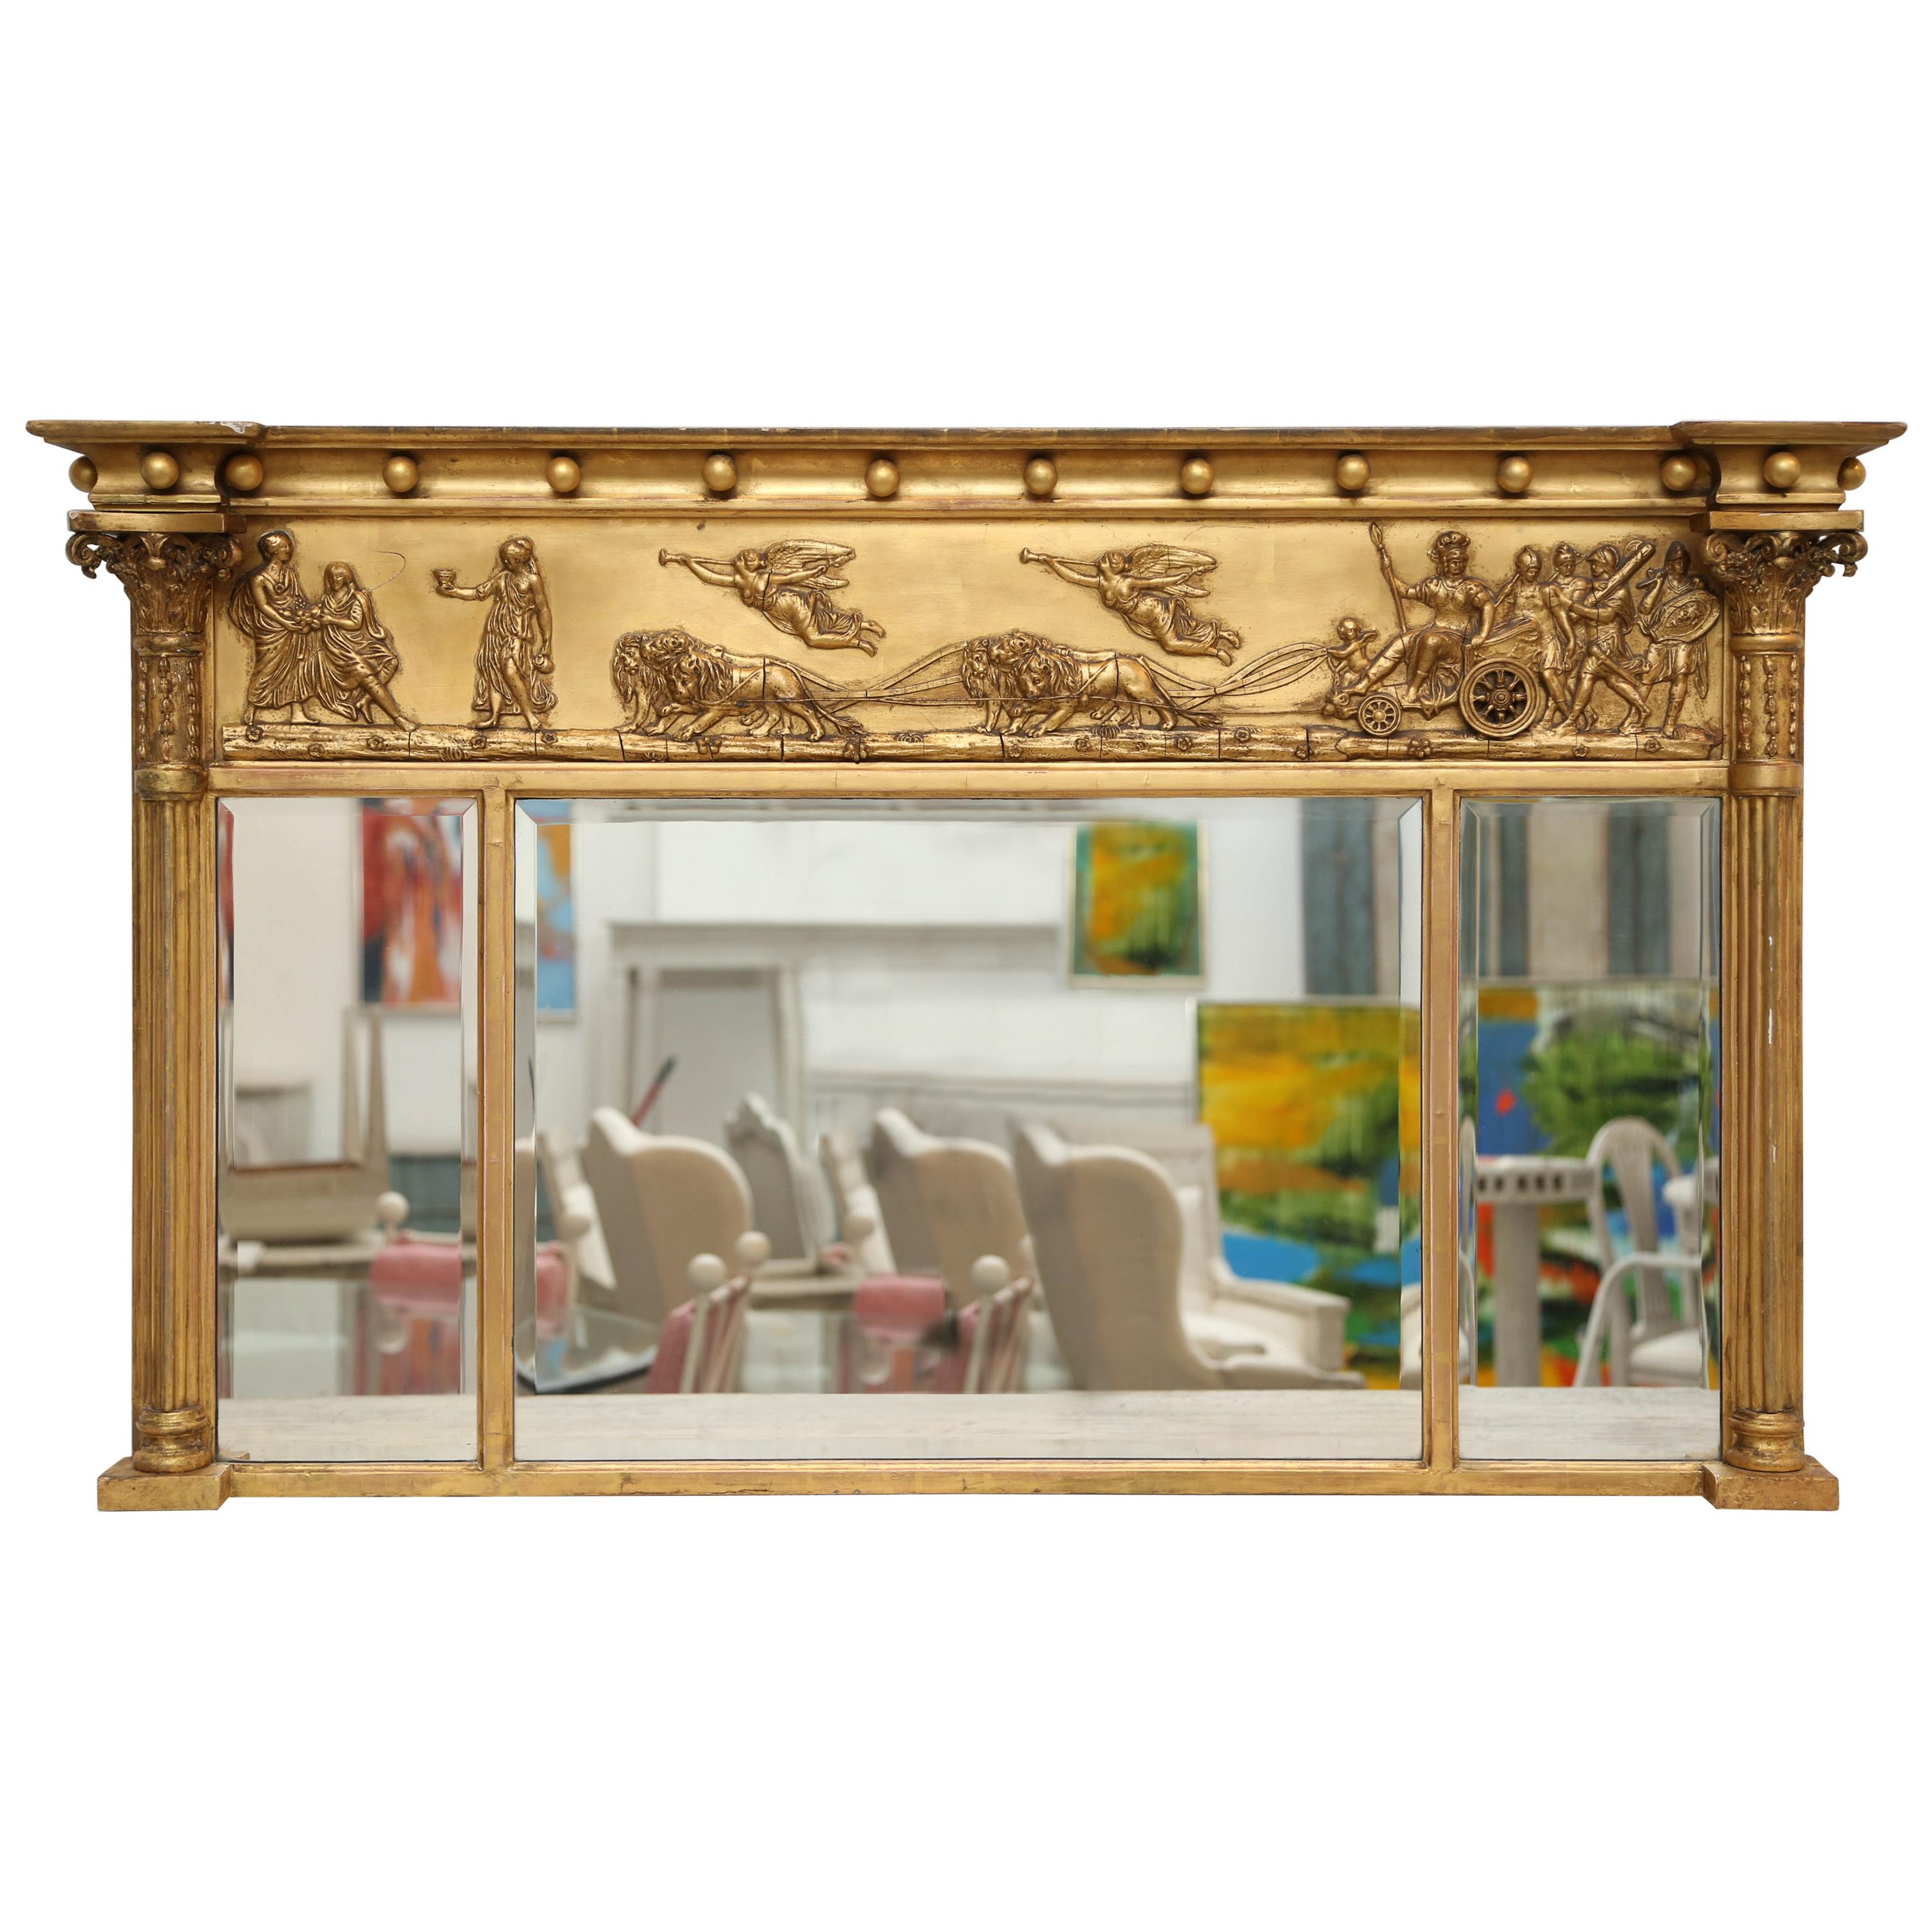 Antique Swedish Neoclassic Giltwood Mirror, Mid-19th Century For Sale